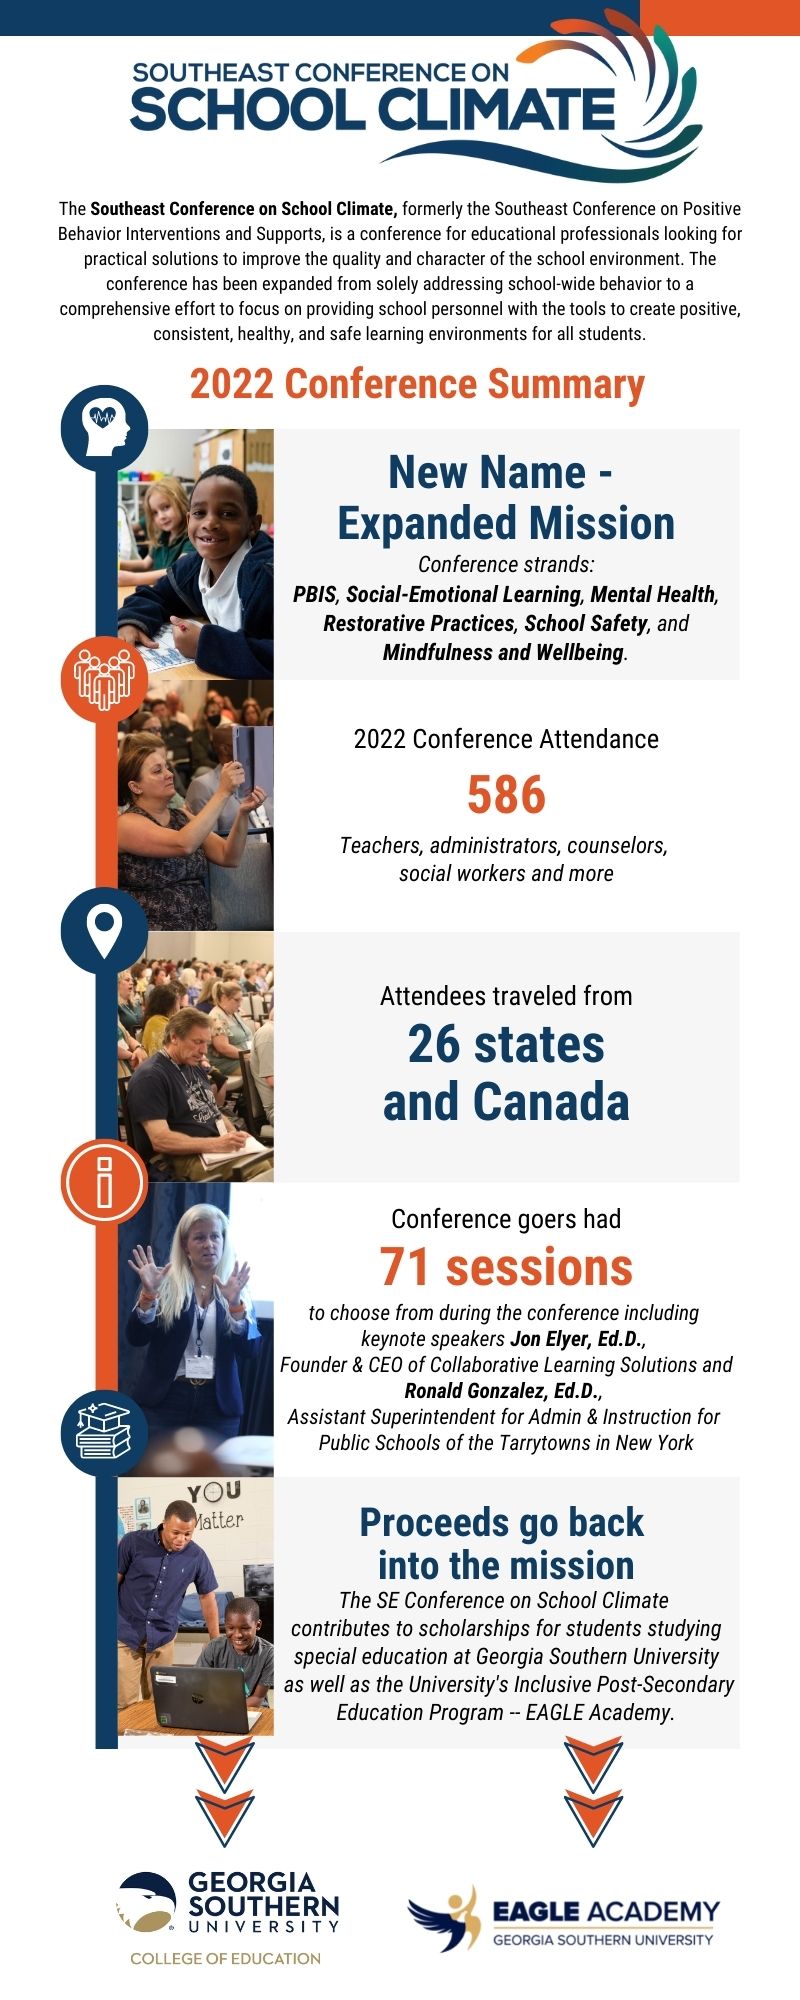 Southest Conference on School Climate Summary - 586 Attendees from 26 states and Canada. 71 Sessions held with proceeds going back to the Mission.